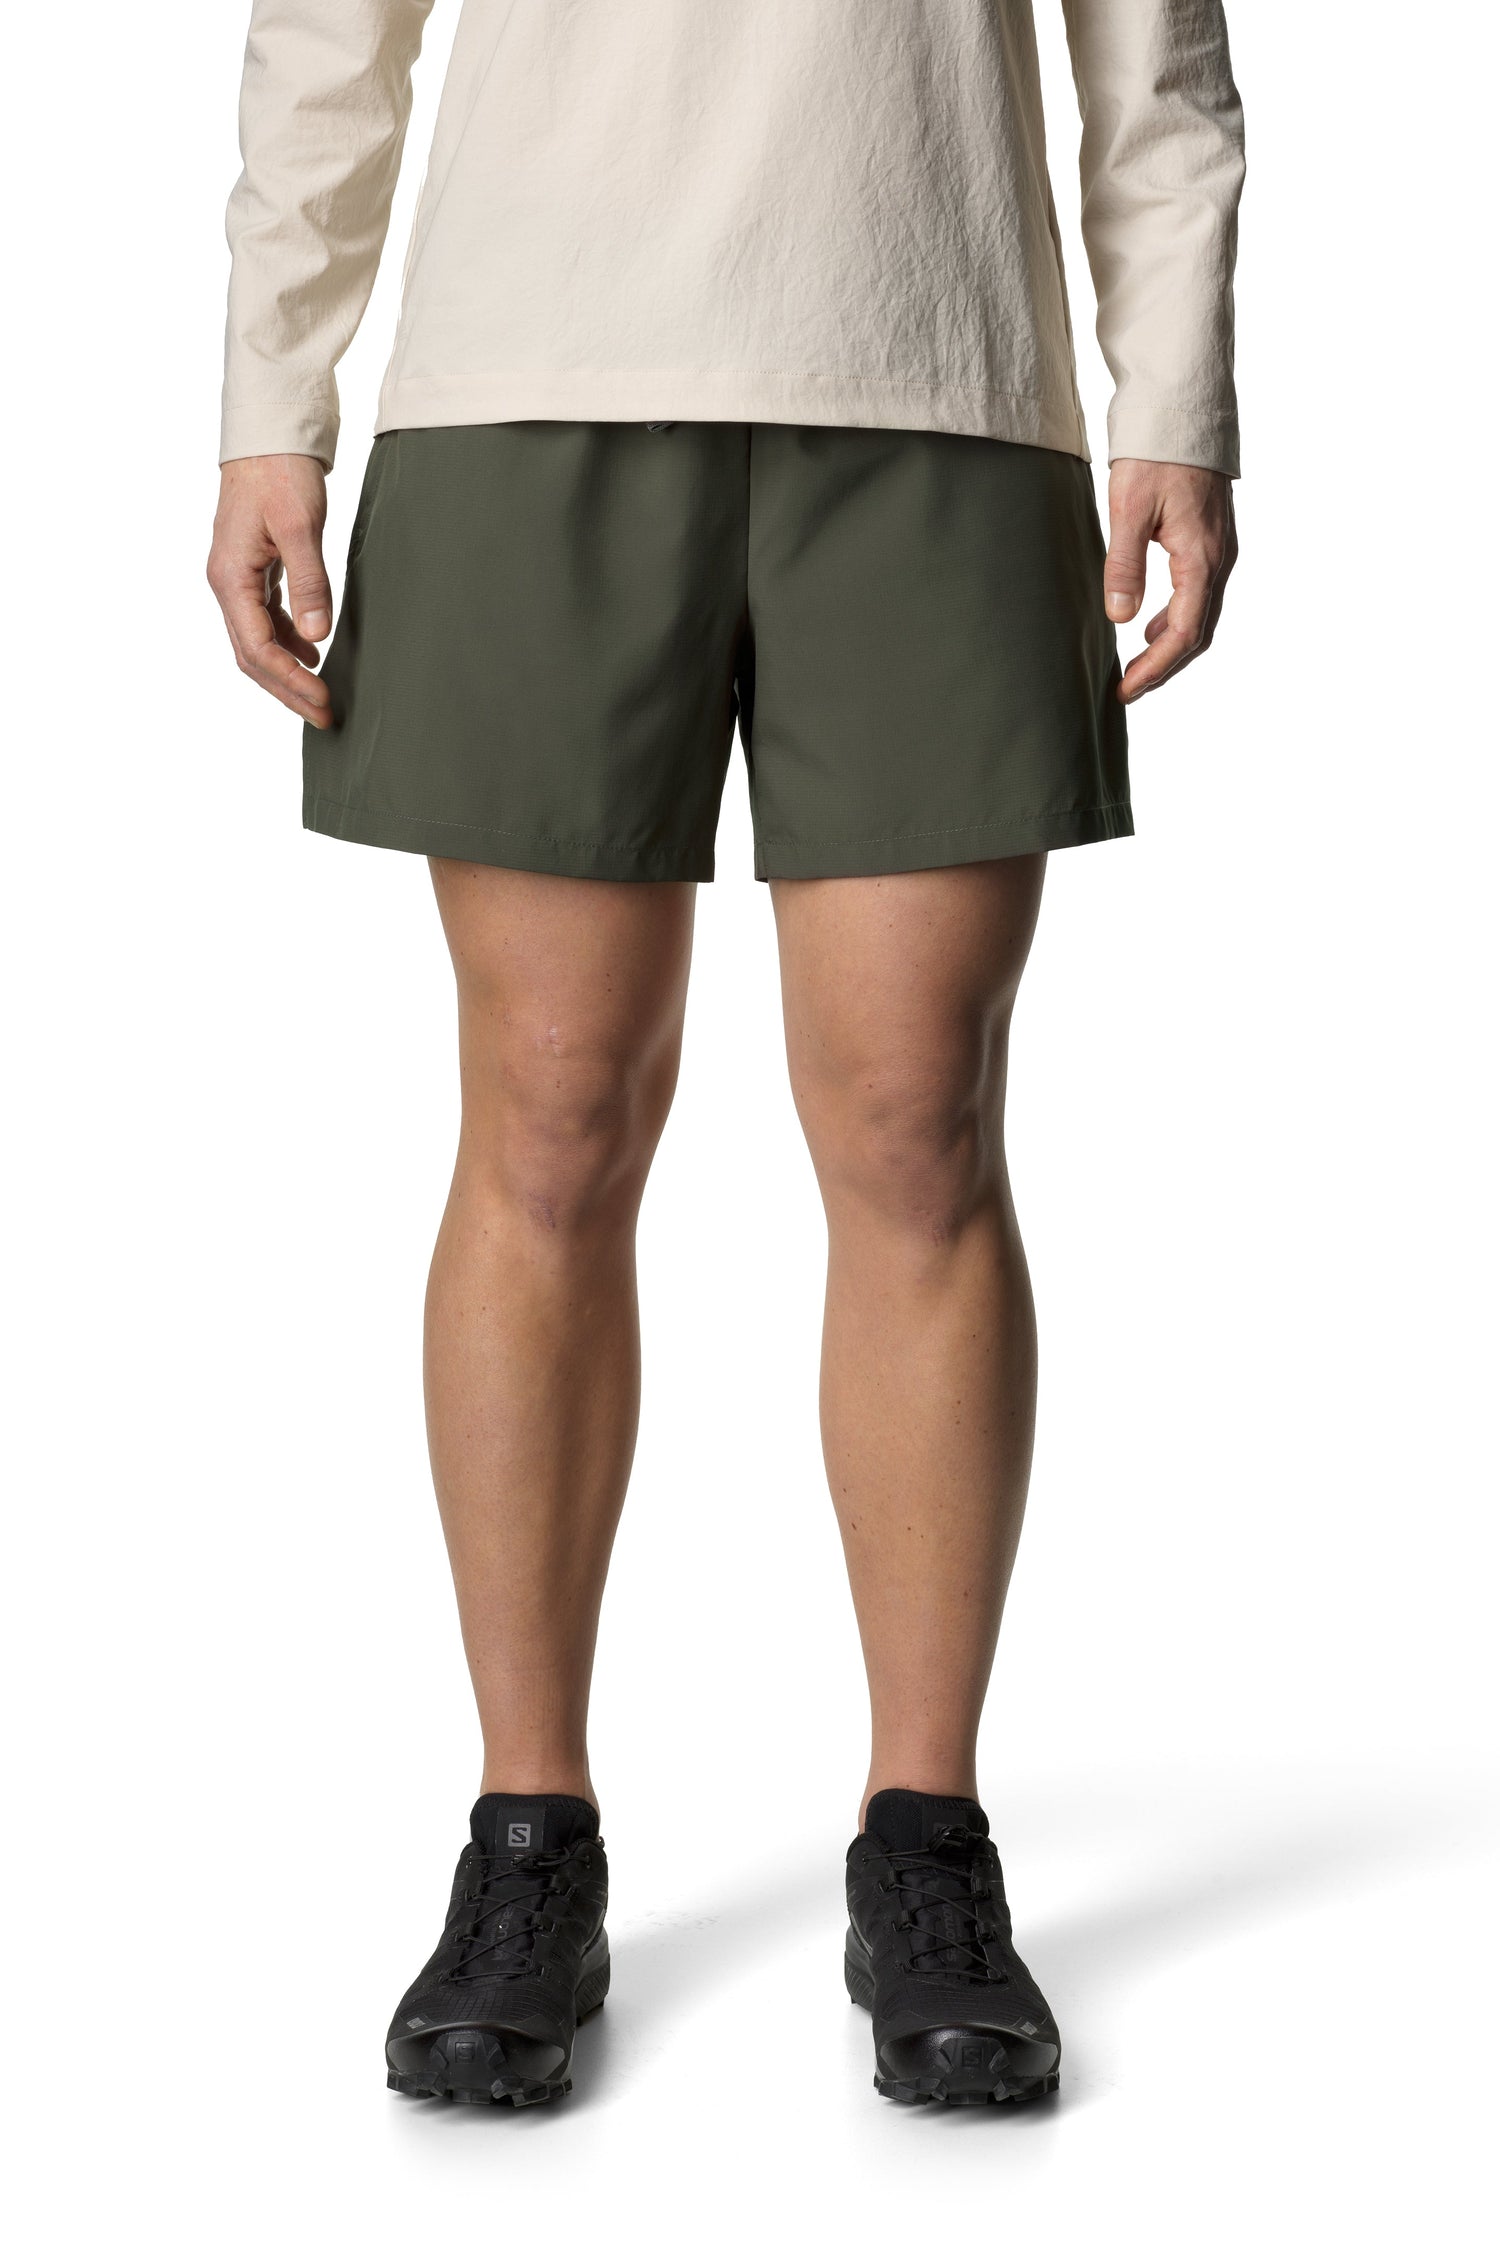 Houdini W's Pace Wind Shorts - 100% recycled polyester Baremark Green Pants